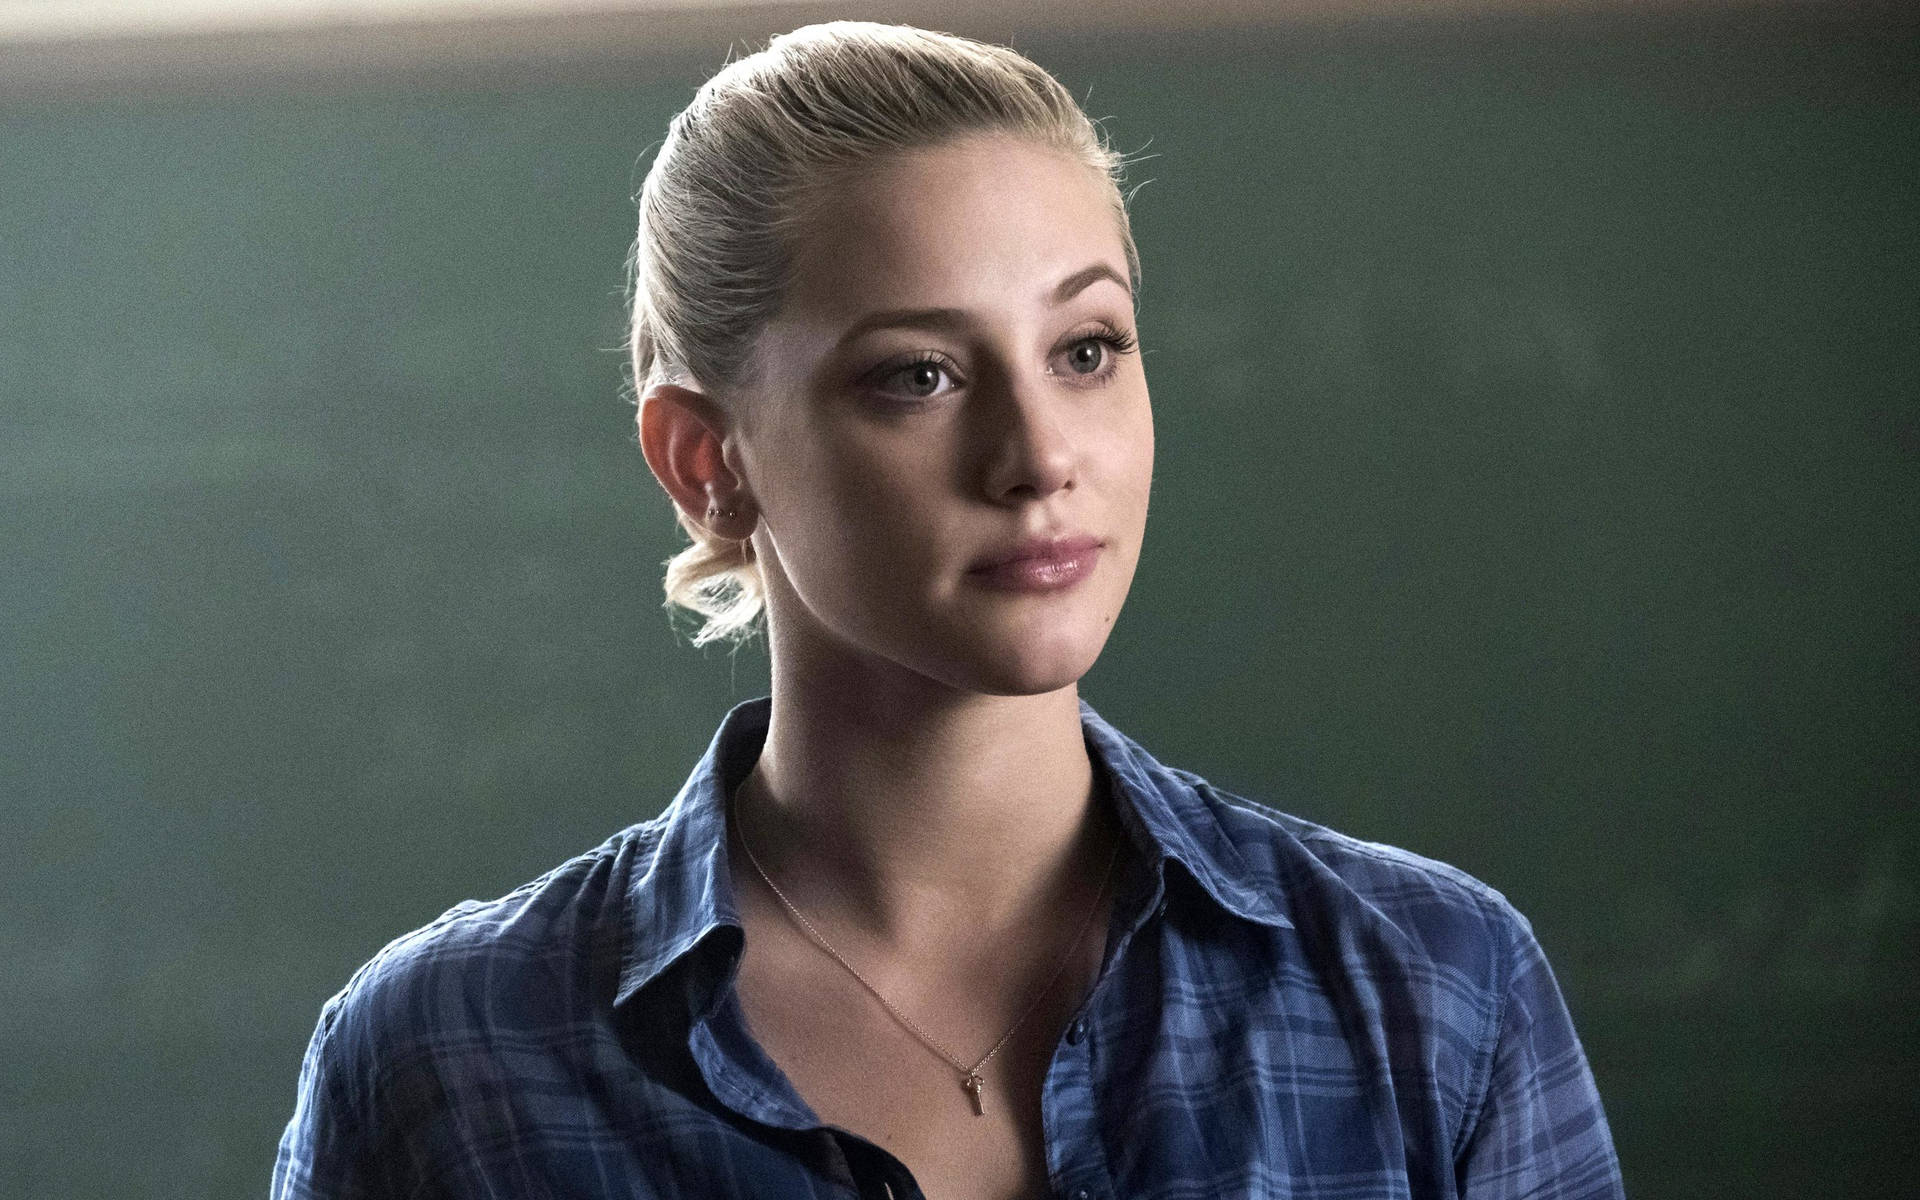 Lilireinhart Blå Rutig Piké - Would Be A Suitable Translation For A Description Of A Potential Computer Or Mobile Wallpaper Featuring The Actress Wearing A Blue Checkered Polo Shirt. Wallpaper